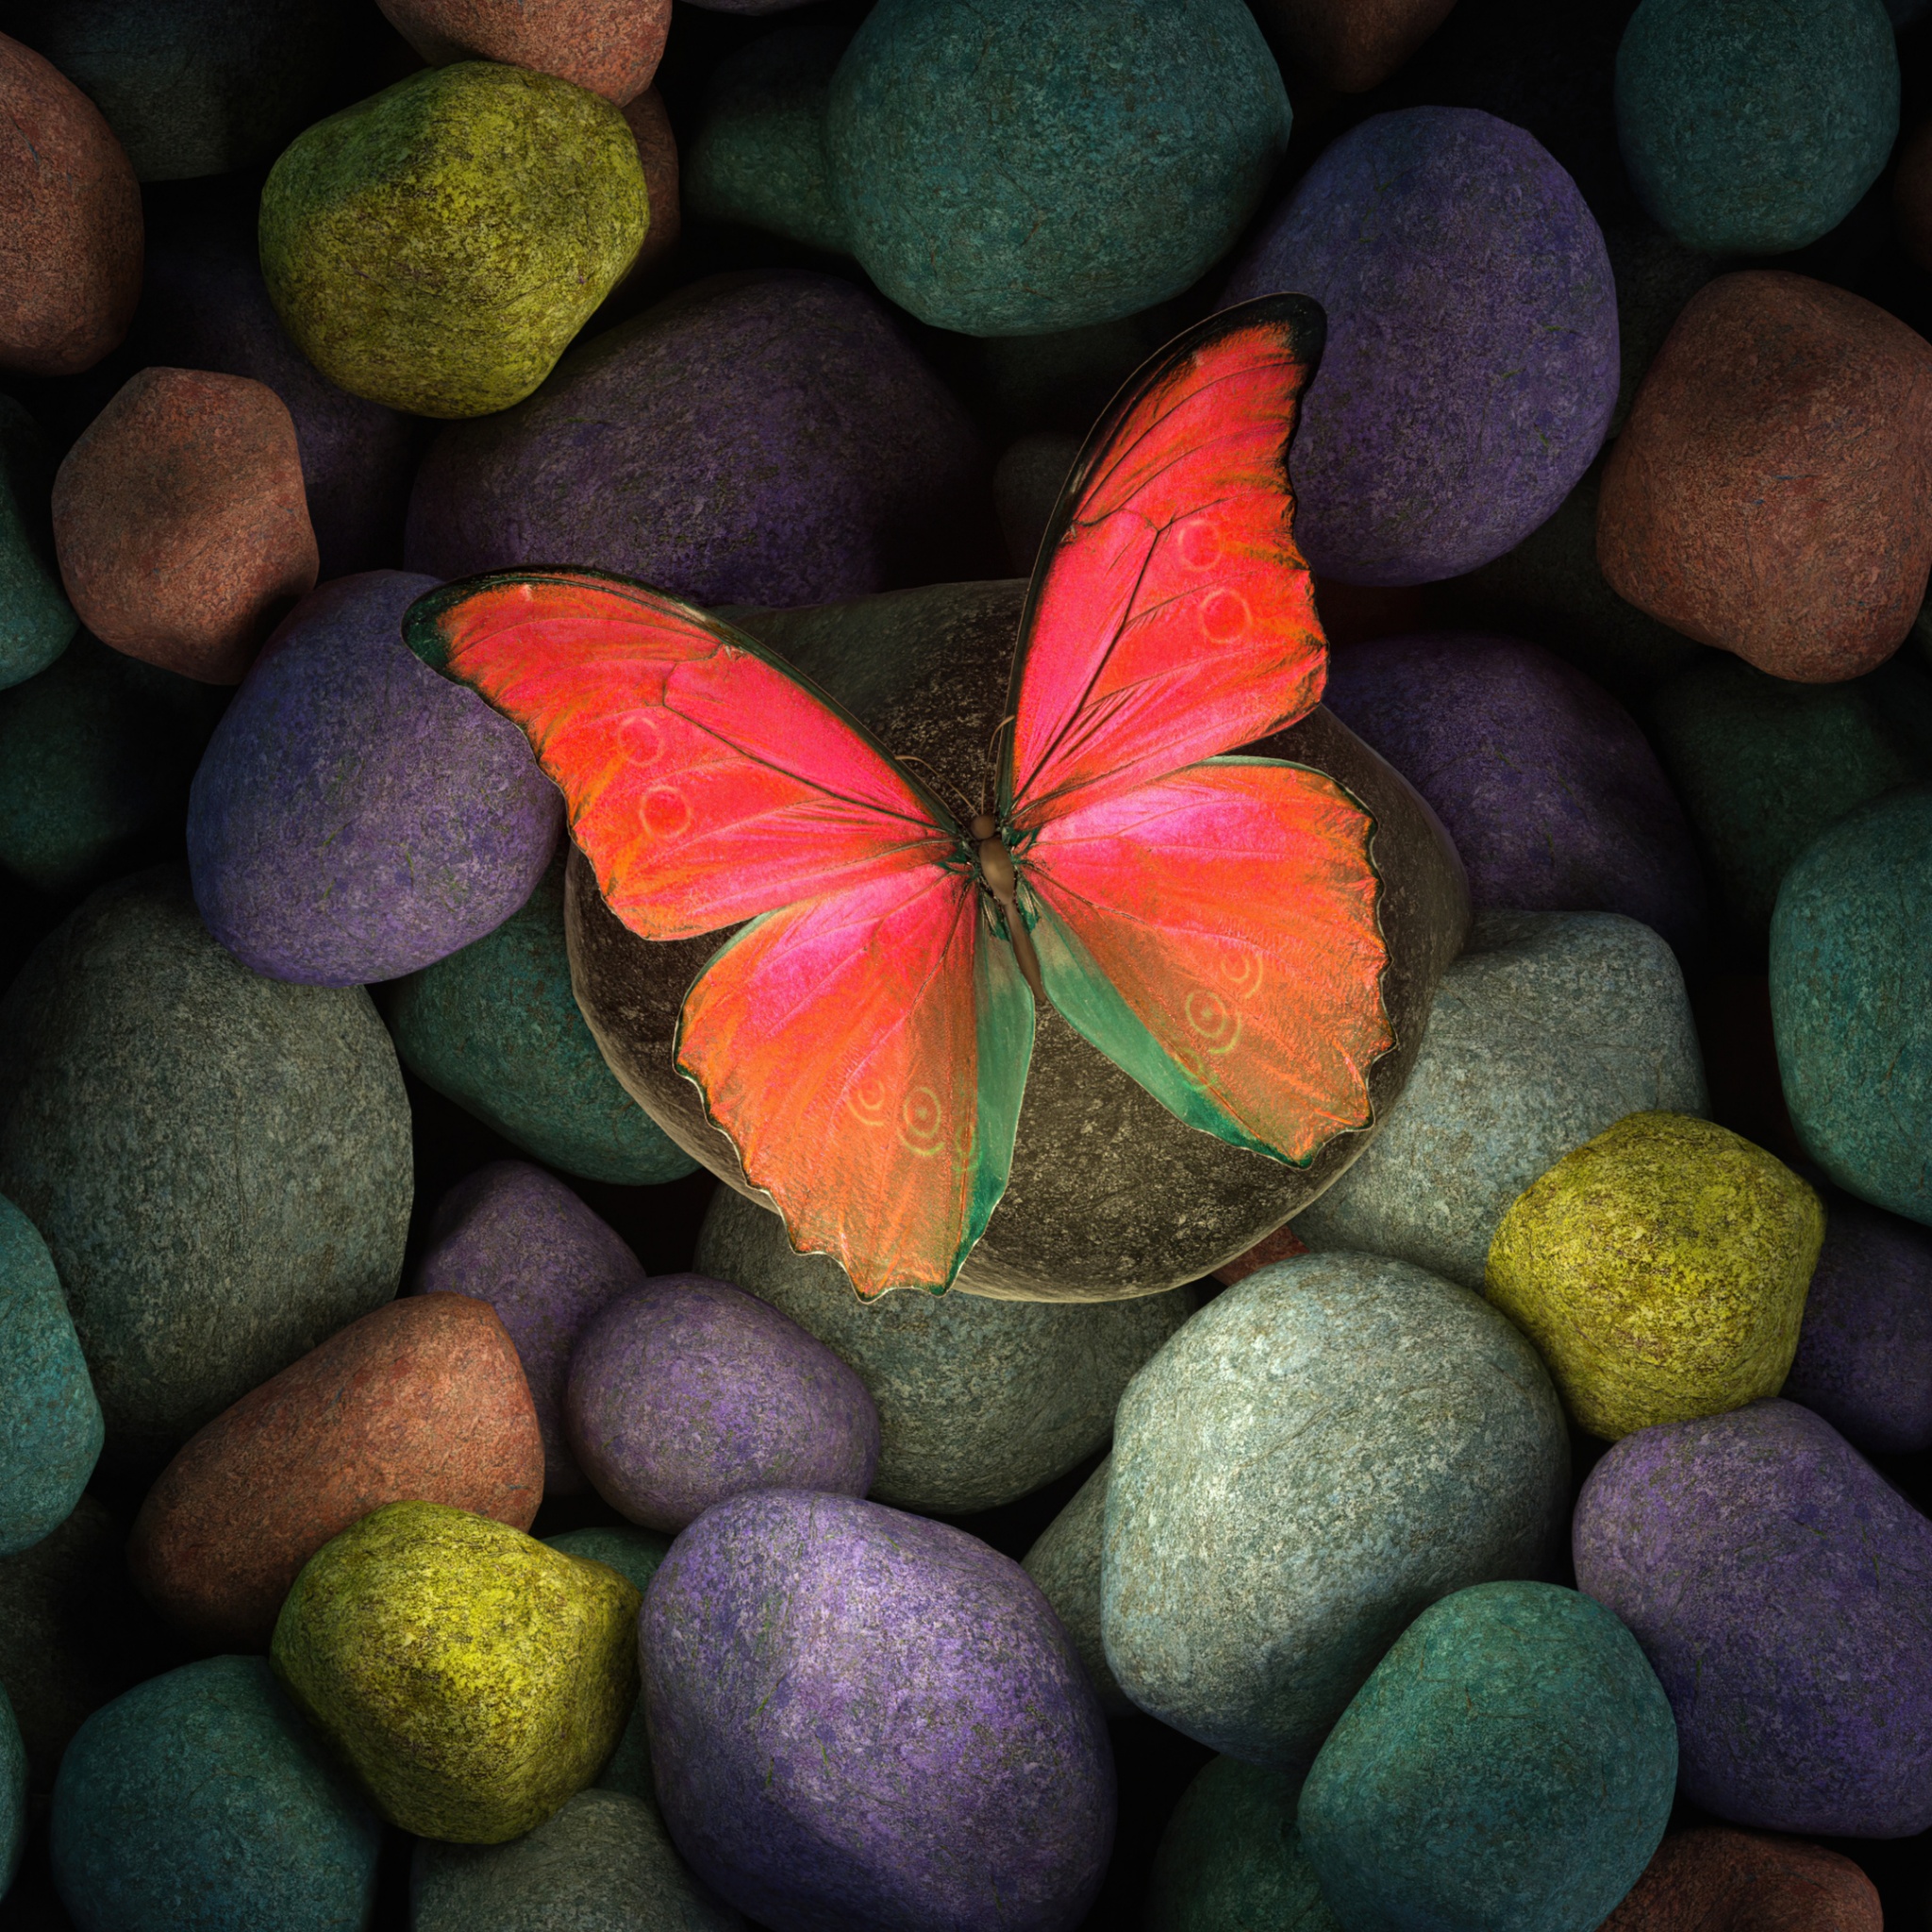 Butterfly Wallpaper 4K, Stones, Colorful, Focus, Photography, #3135